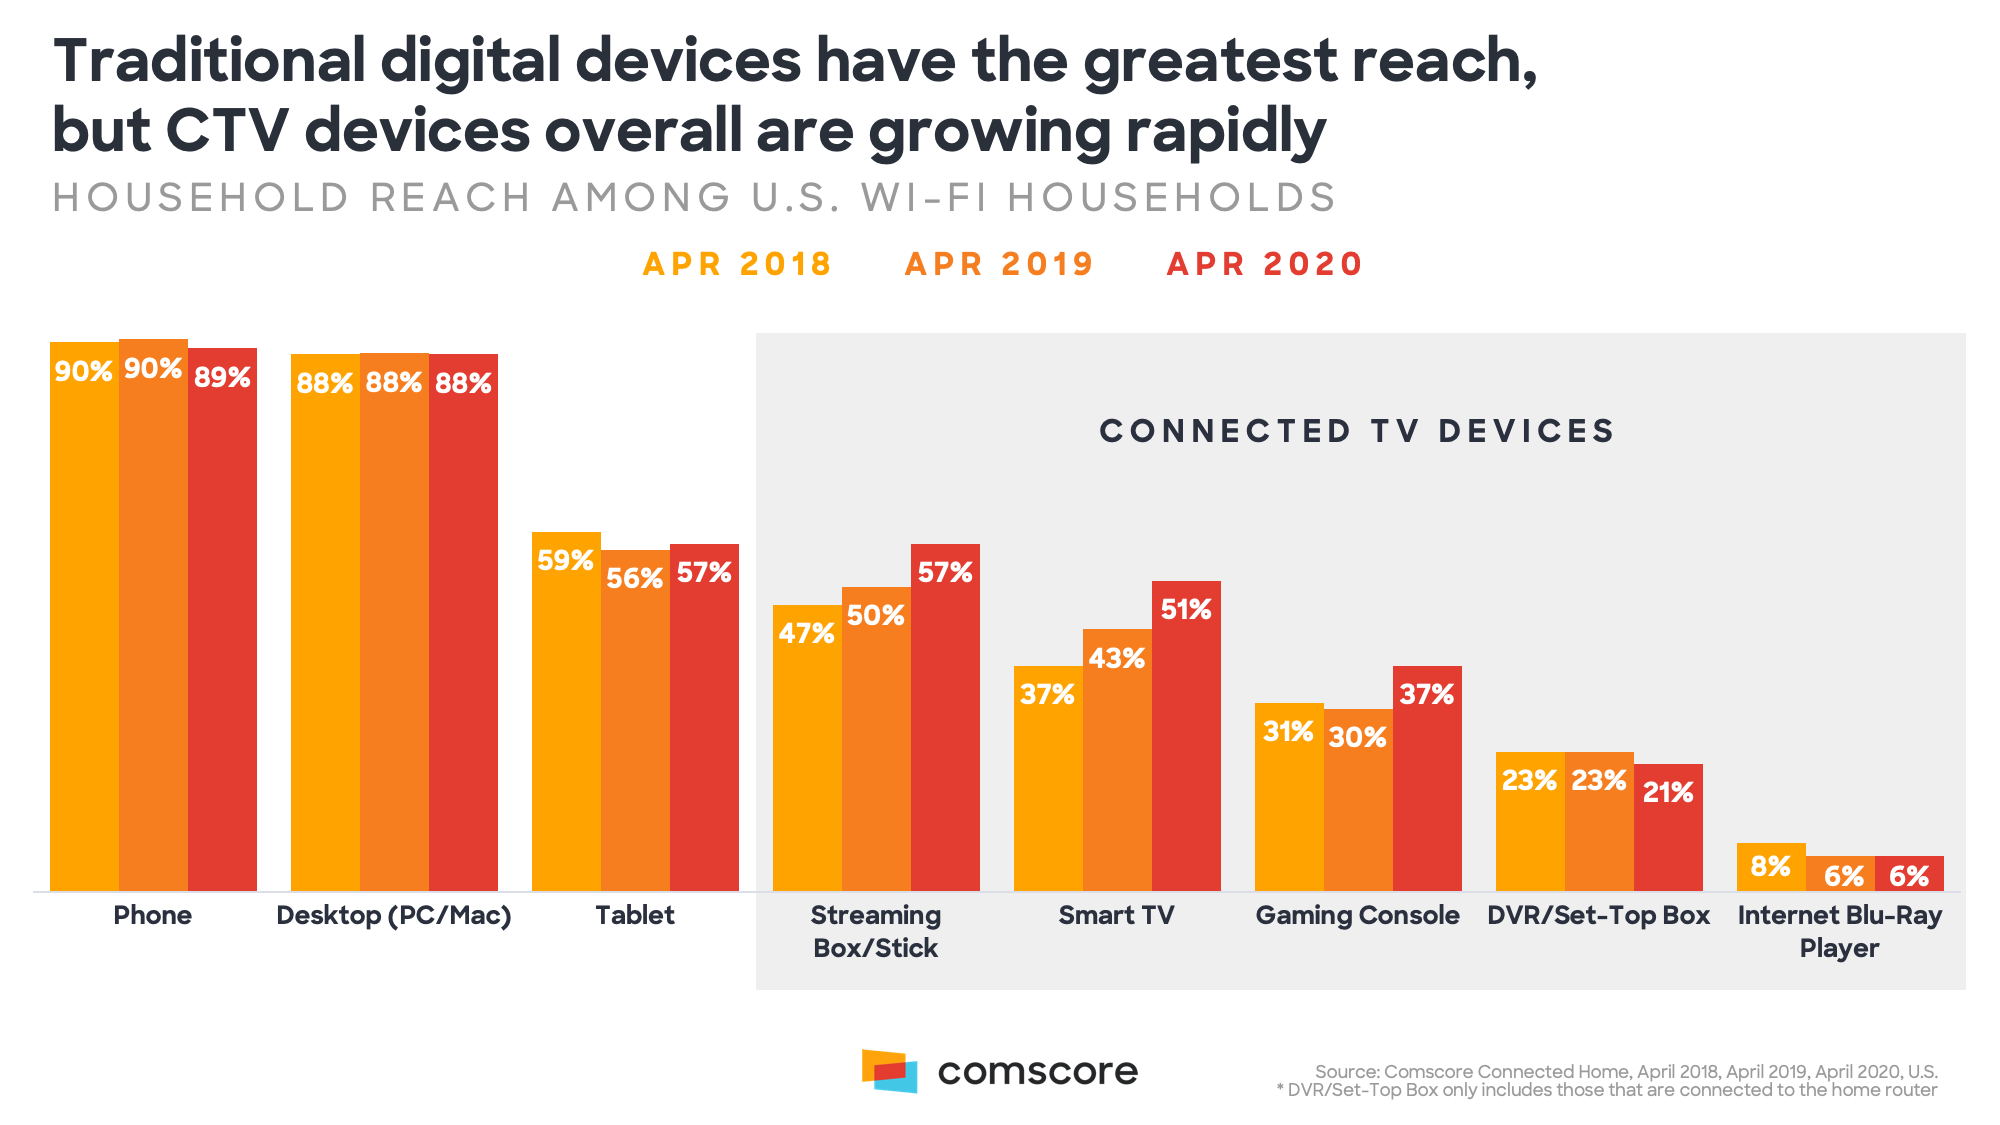 Traditional Digital Services Have the Greatest Reach